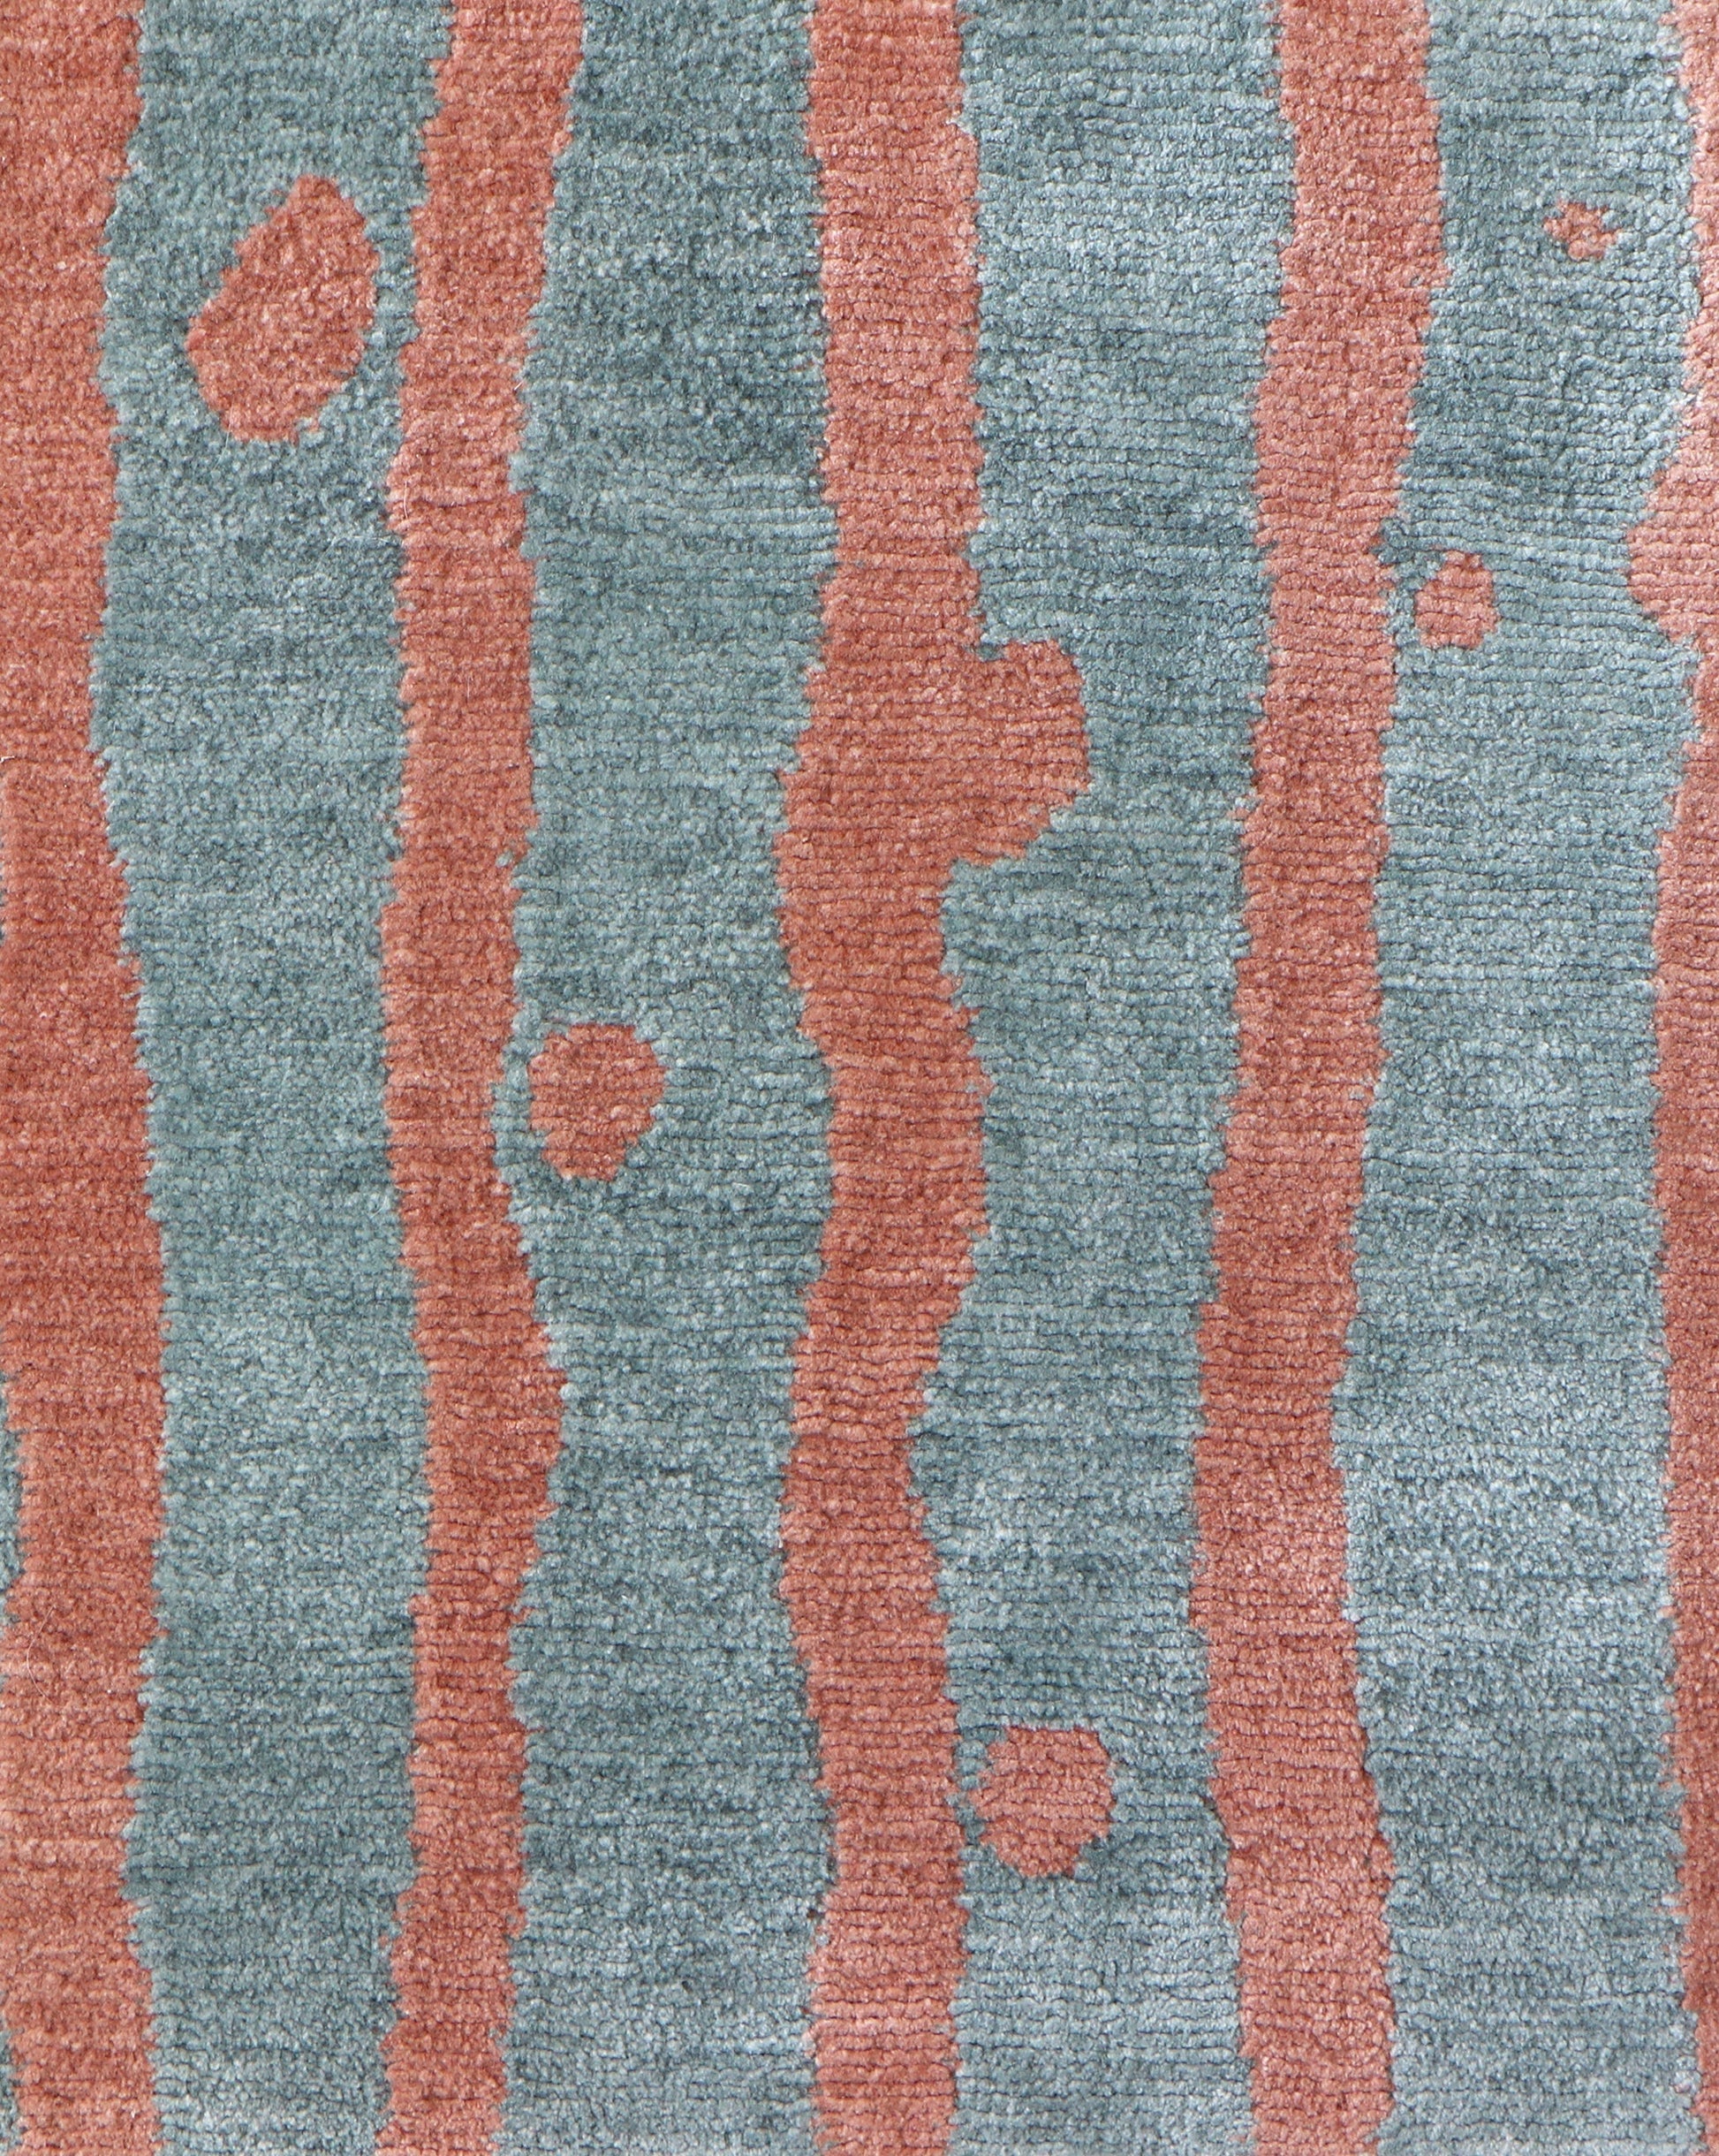 A bold Drippy Stripe Hand Knotted Rug with blue and pink stripes created using hybrid weaving techniques